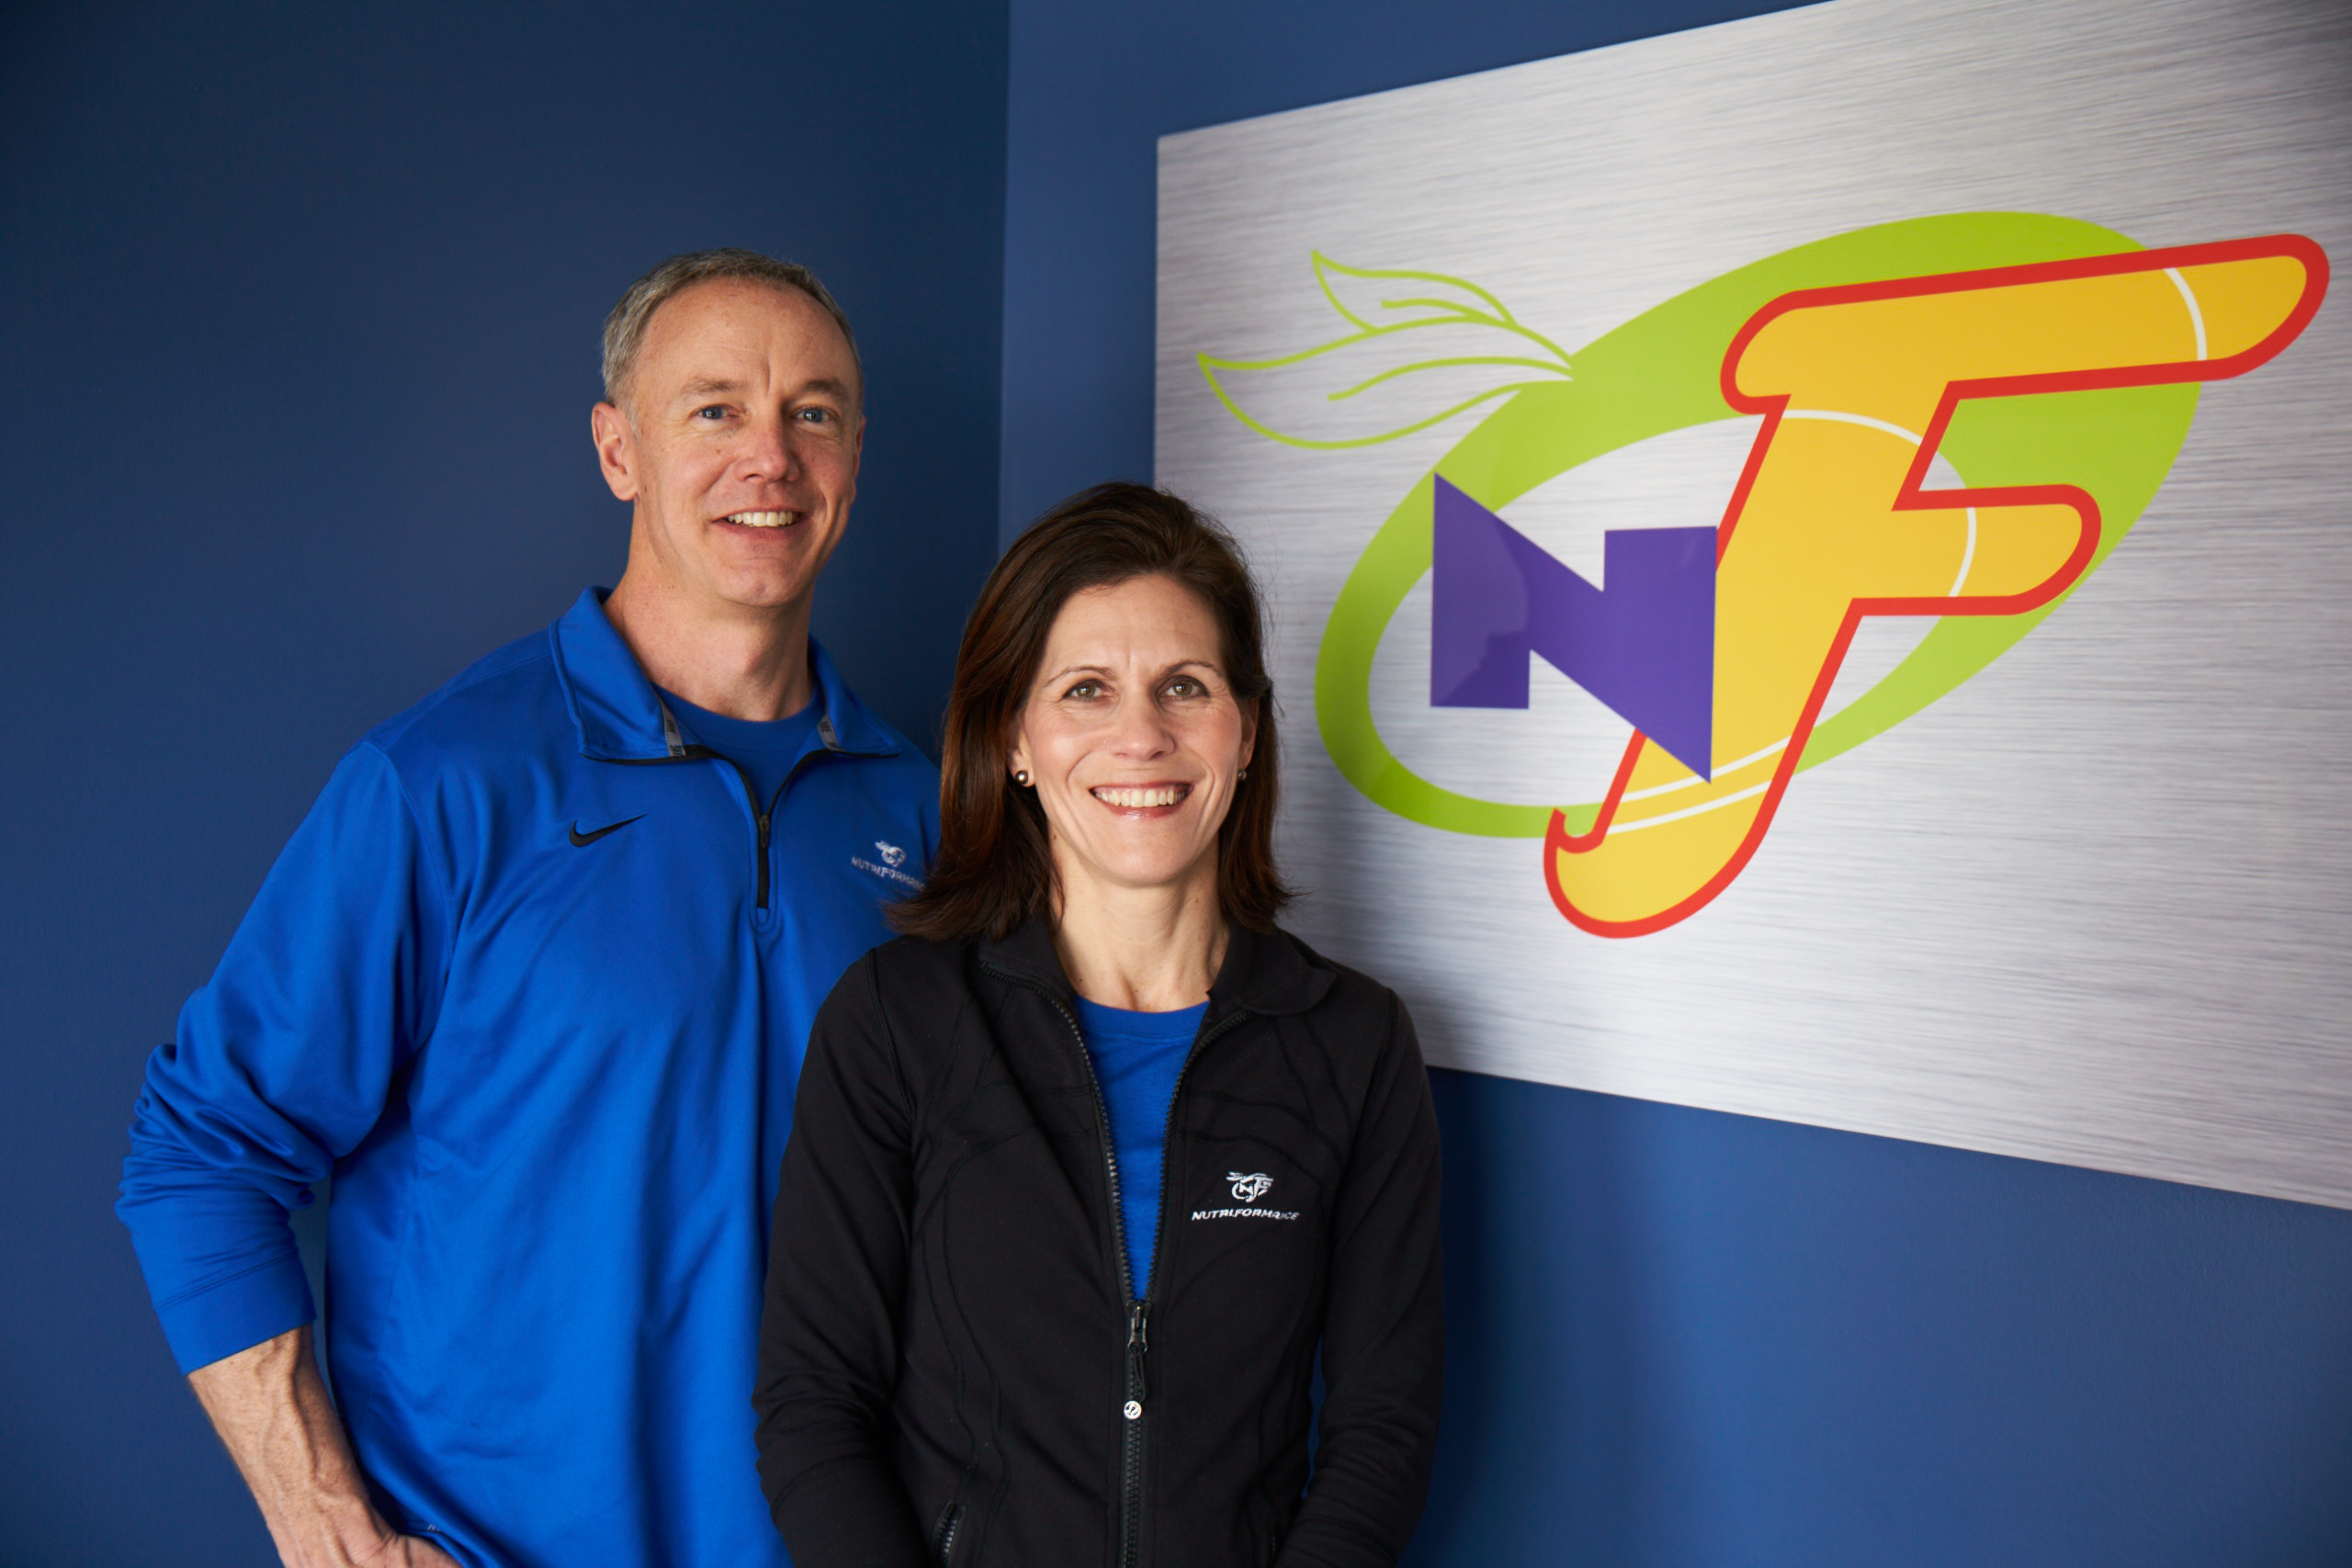 Dale and ellie huff- Nutriformance, St. Louis, MO